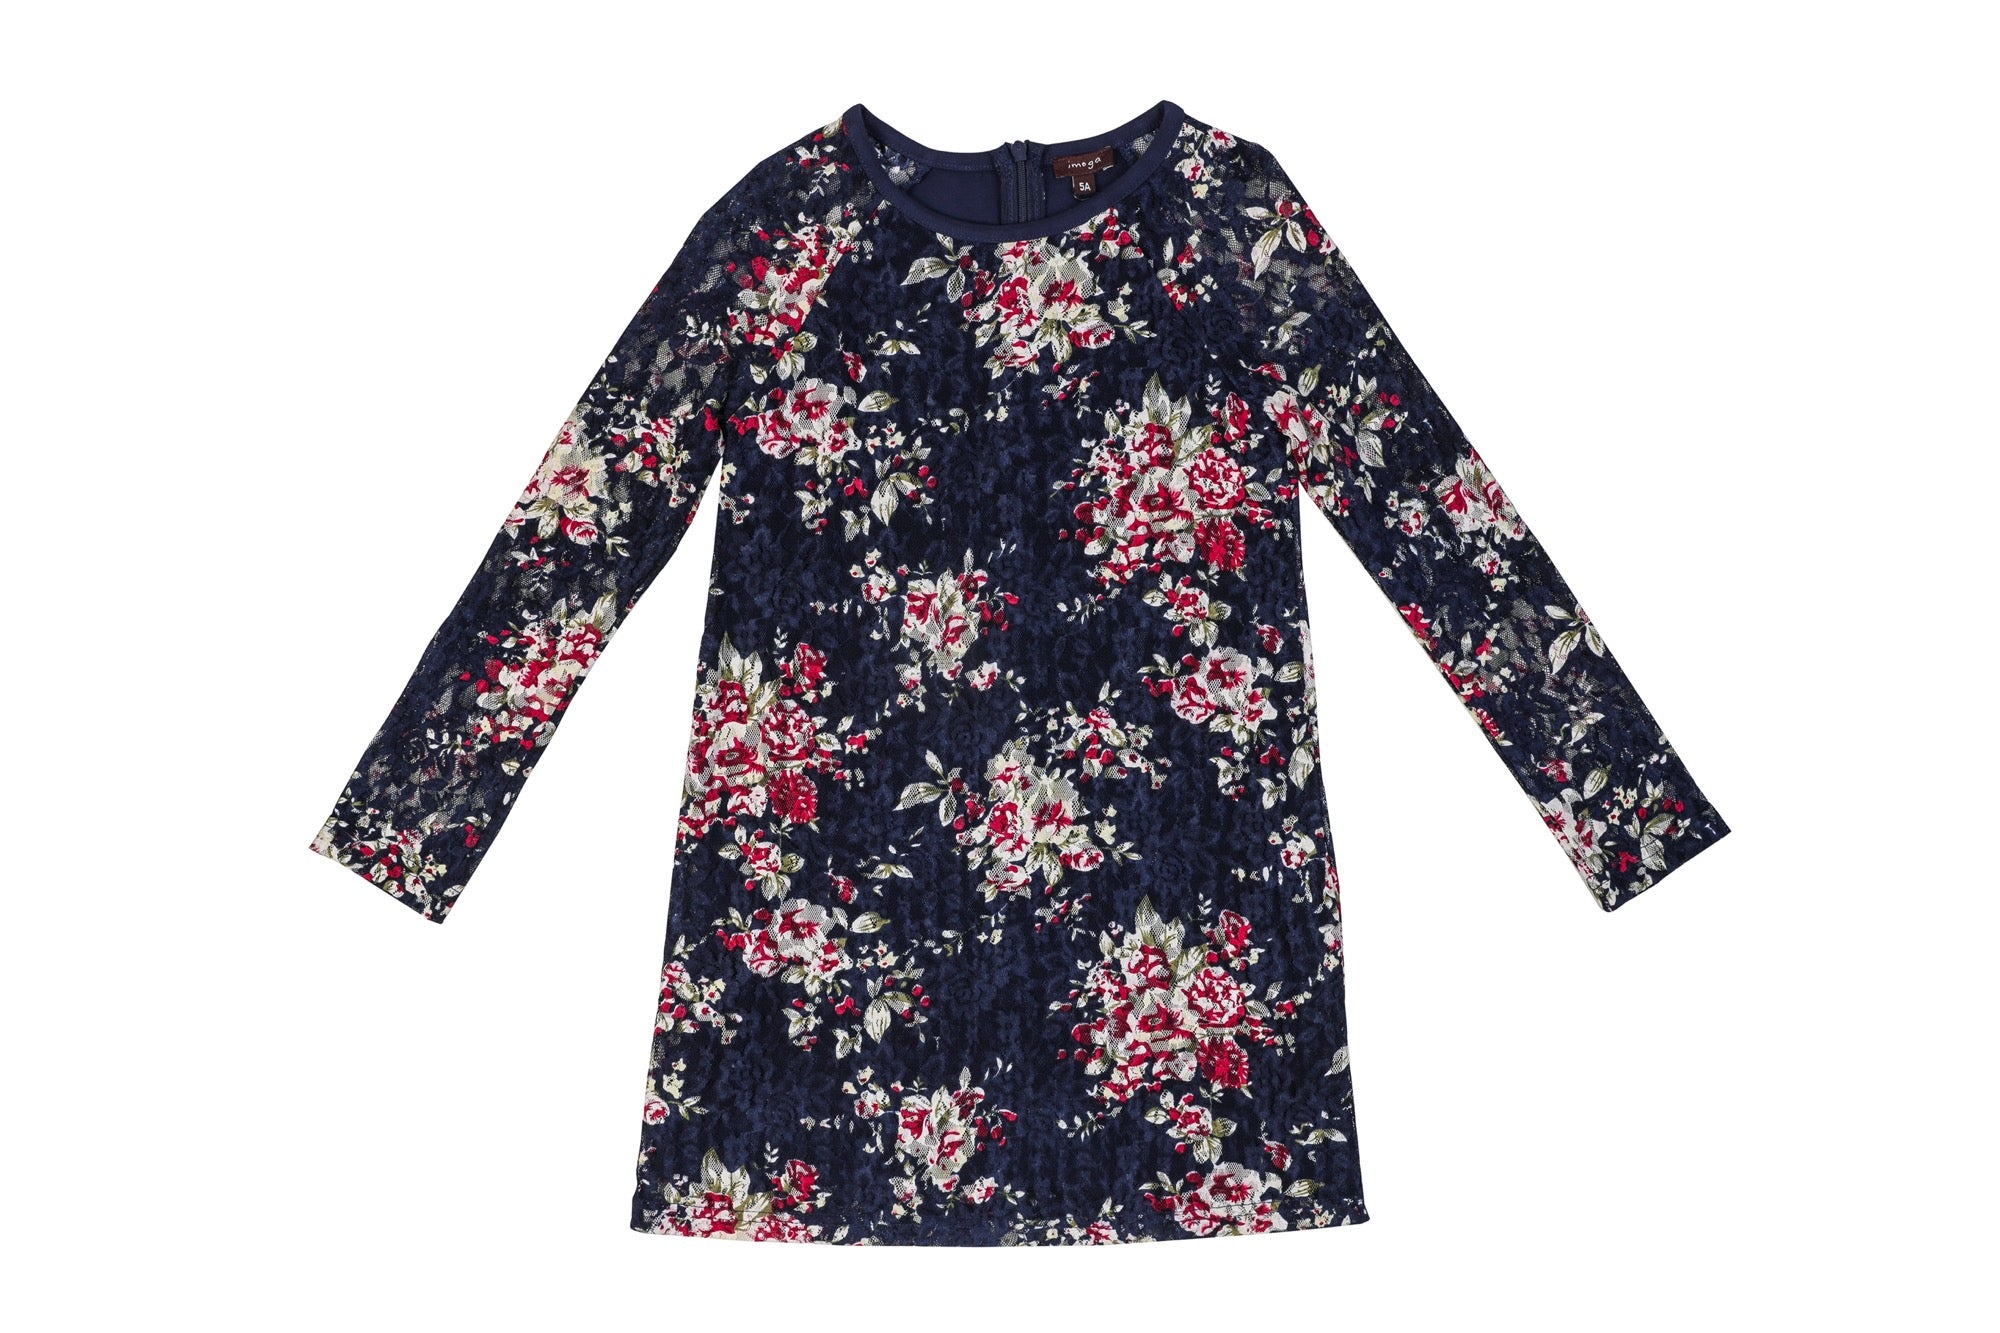 Imoga floral print long sleeves loose fitting casual dress for girls